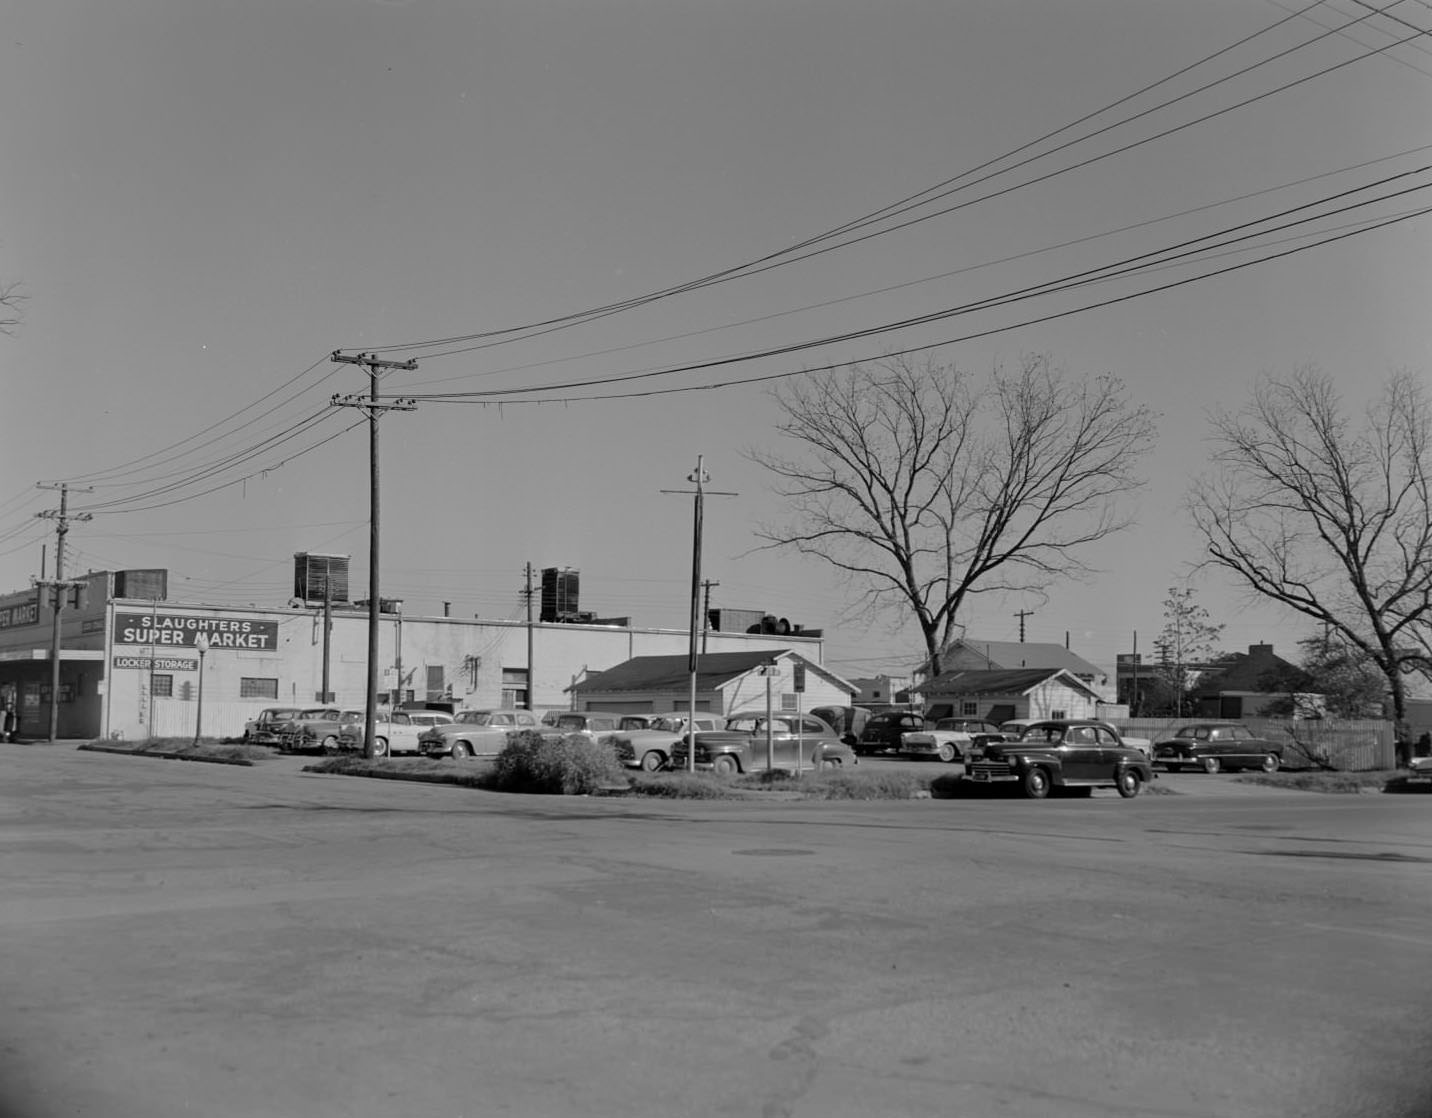 Cars in lot next to Slaughters Supermarket, 1958